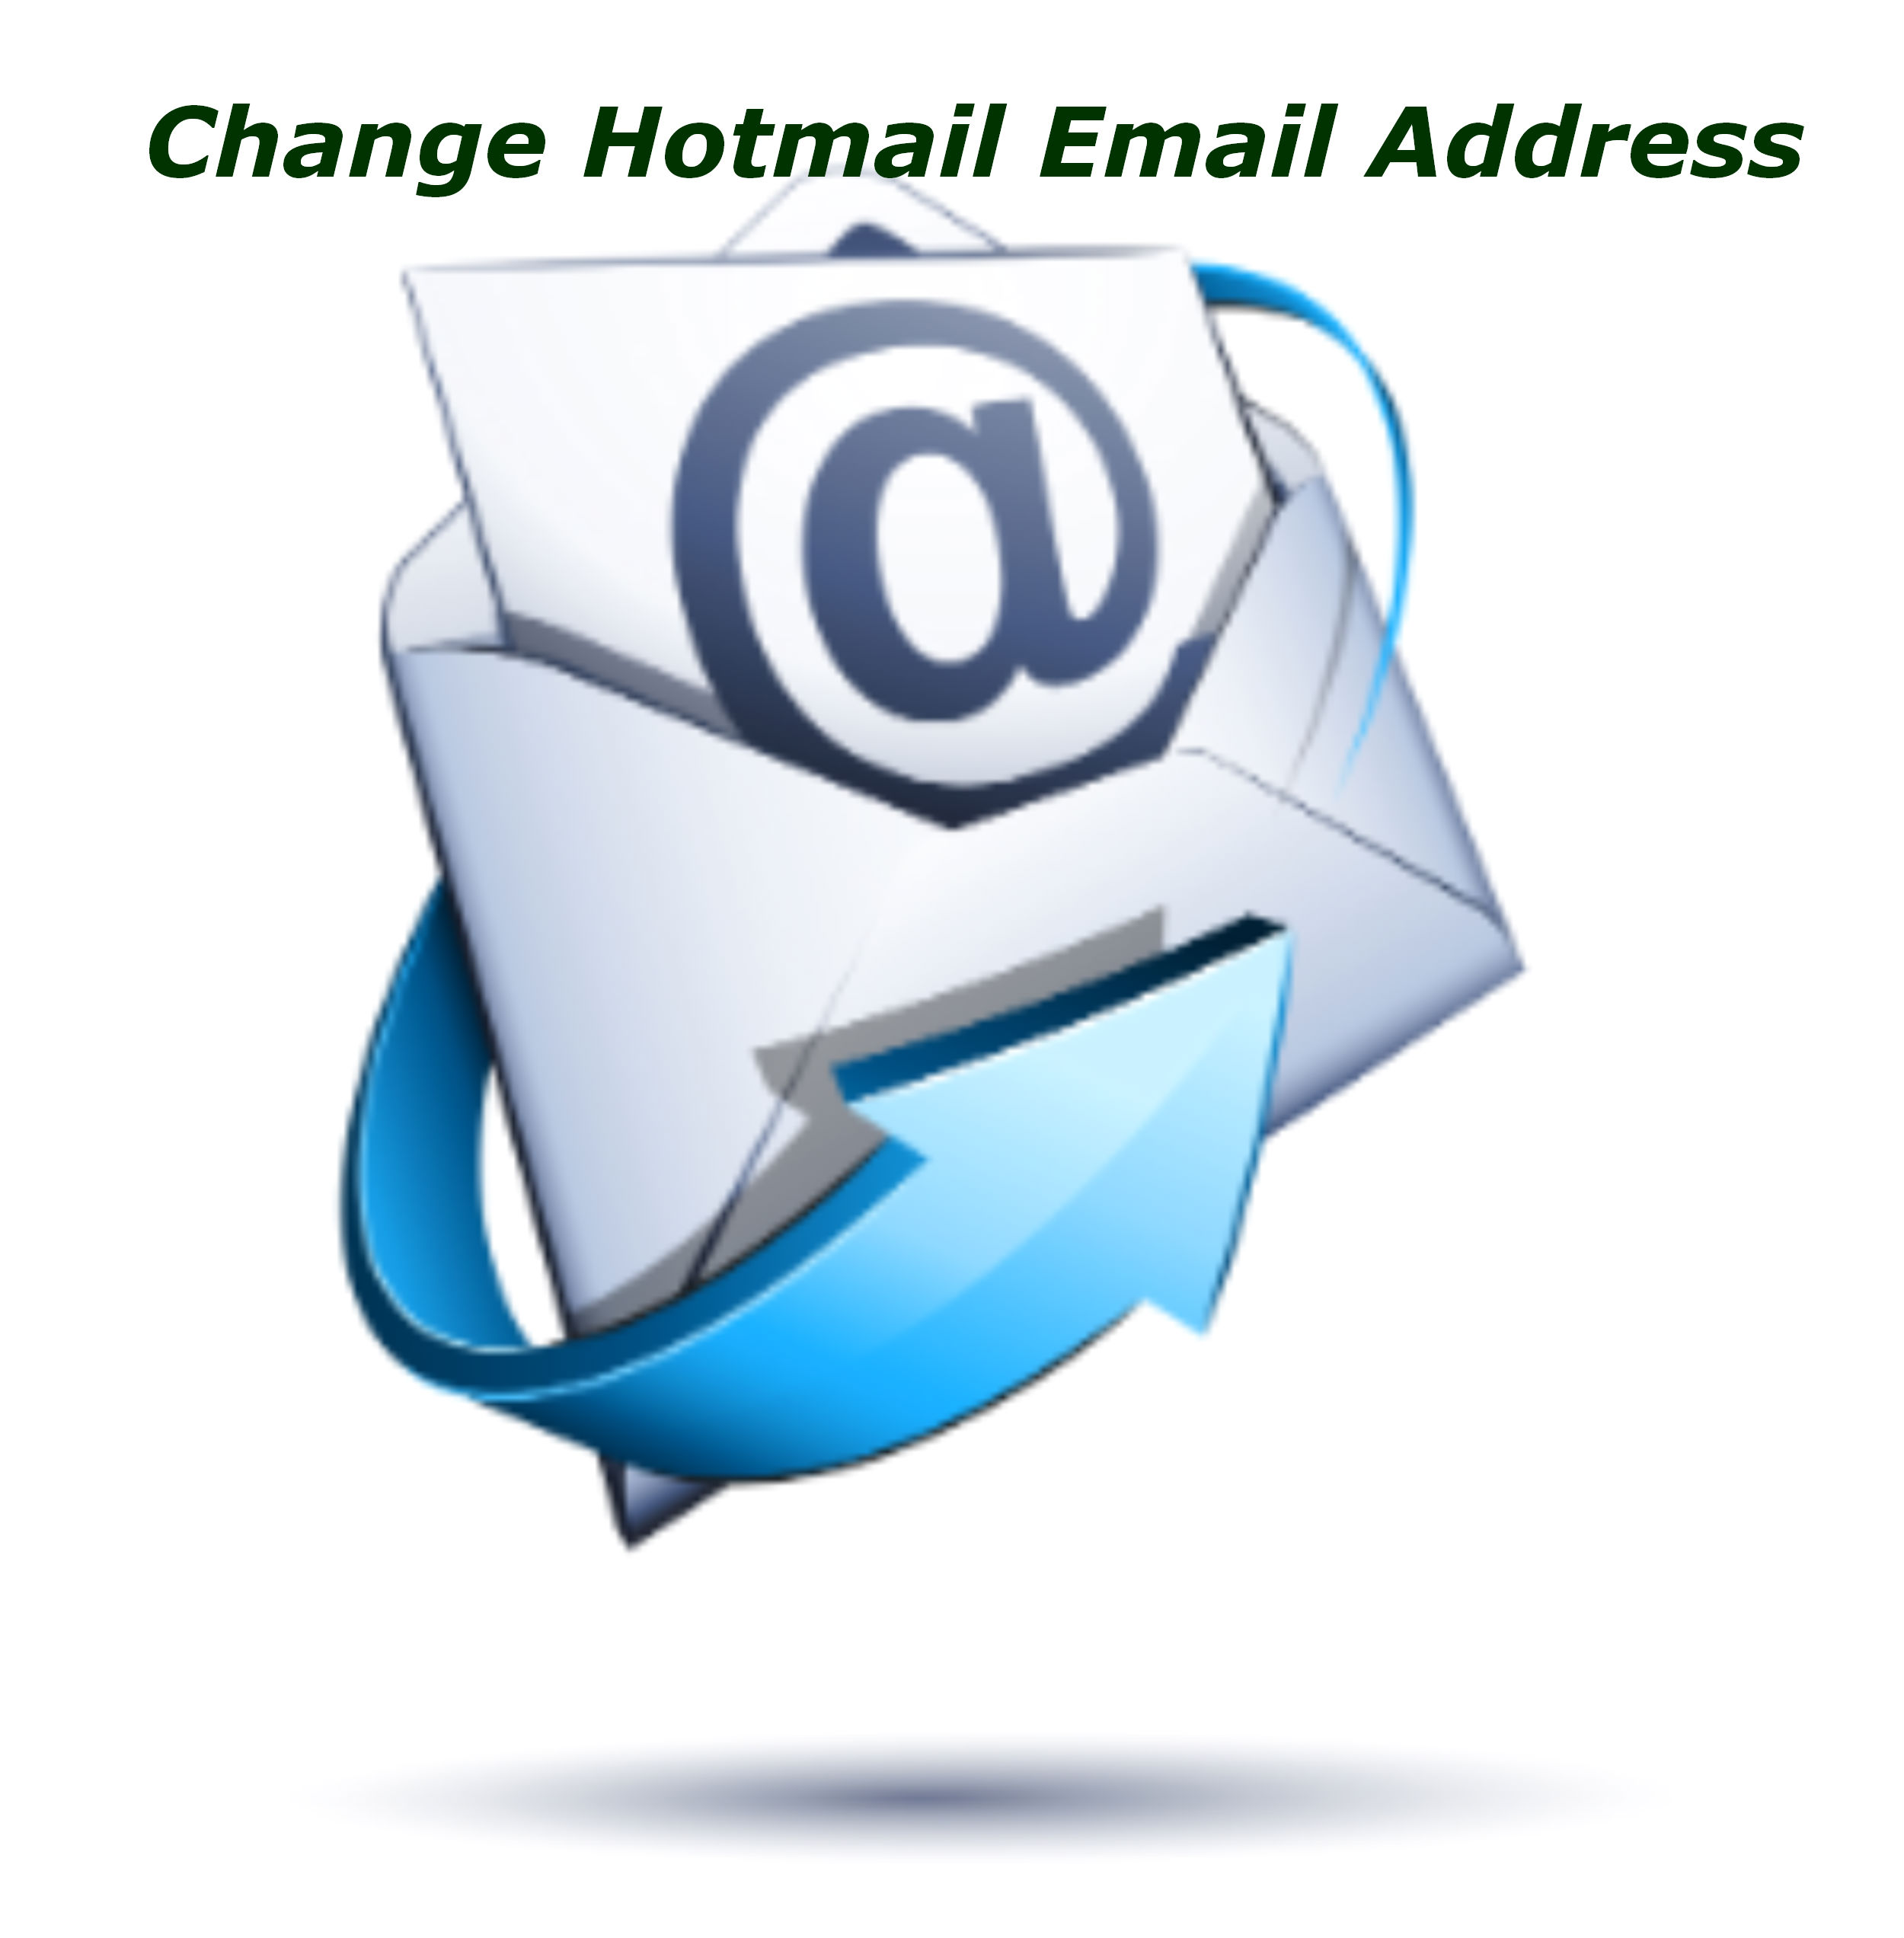 Change Hotmail Email Address